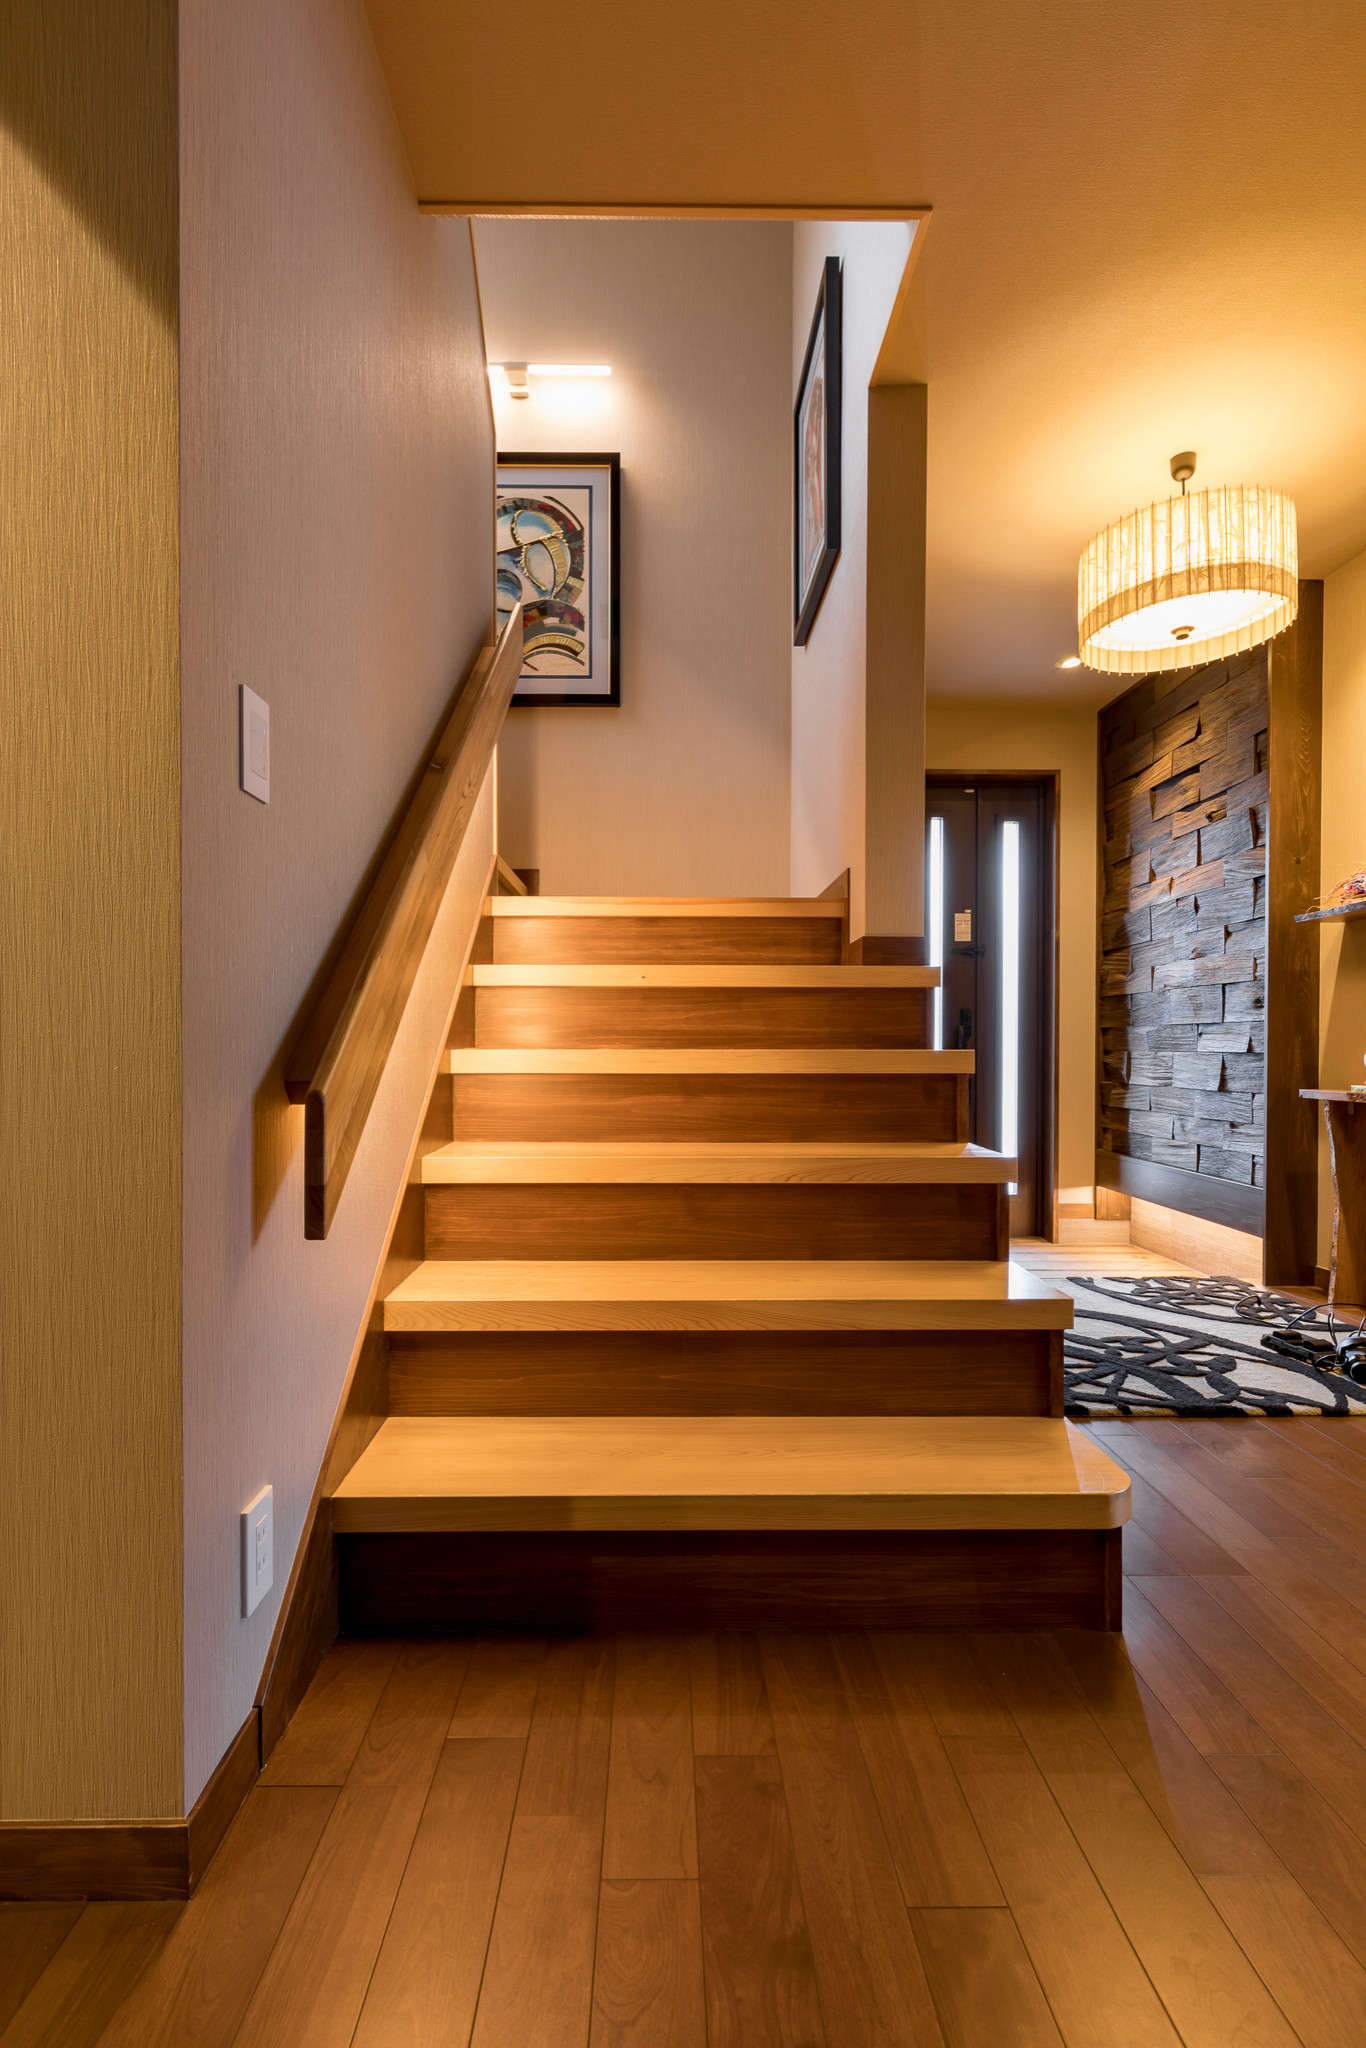 75 Beautiful Plywood Floor Entryway Pictures Ideas September 21 Houzz